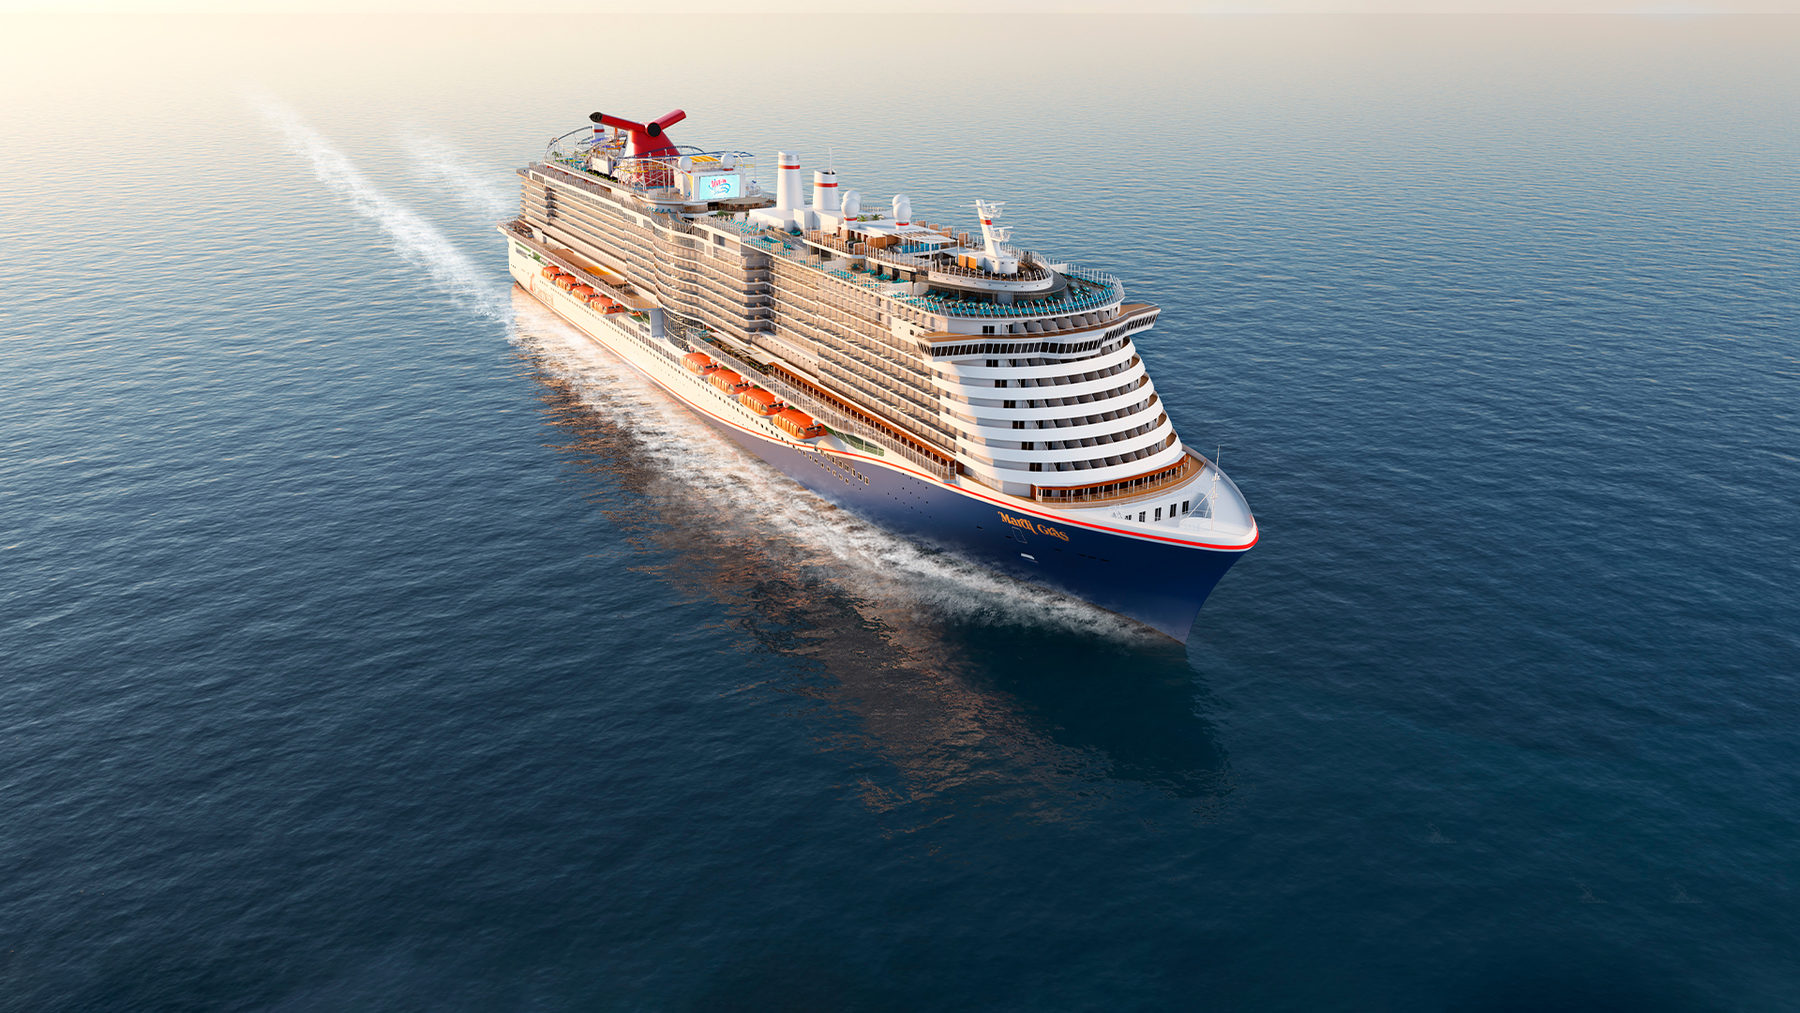 Cruise Deals featuring Brand New Ships Cruise Nation